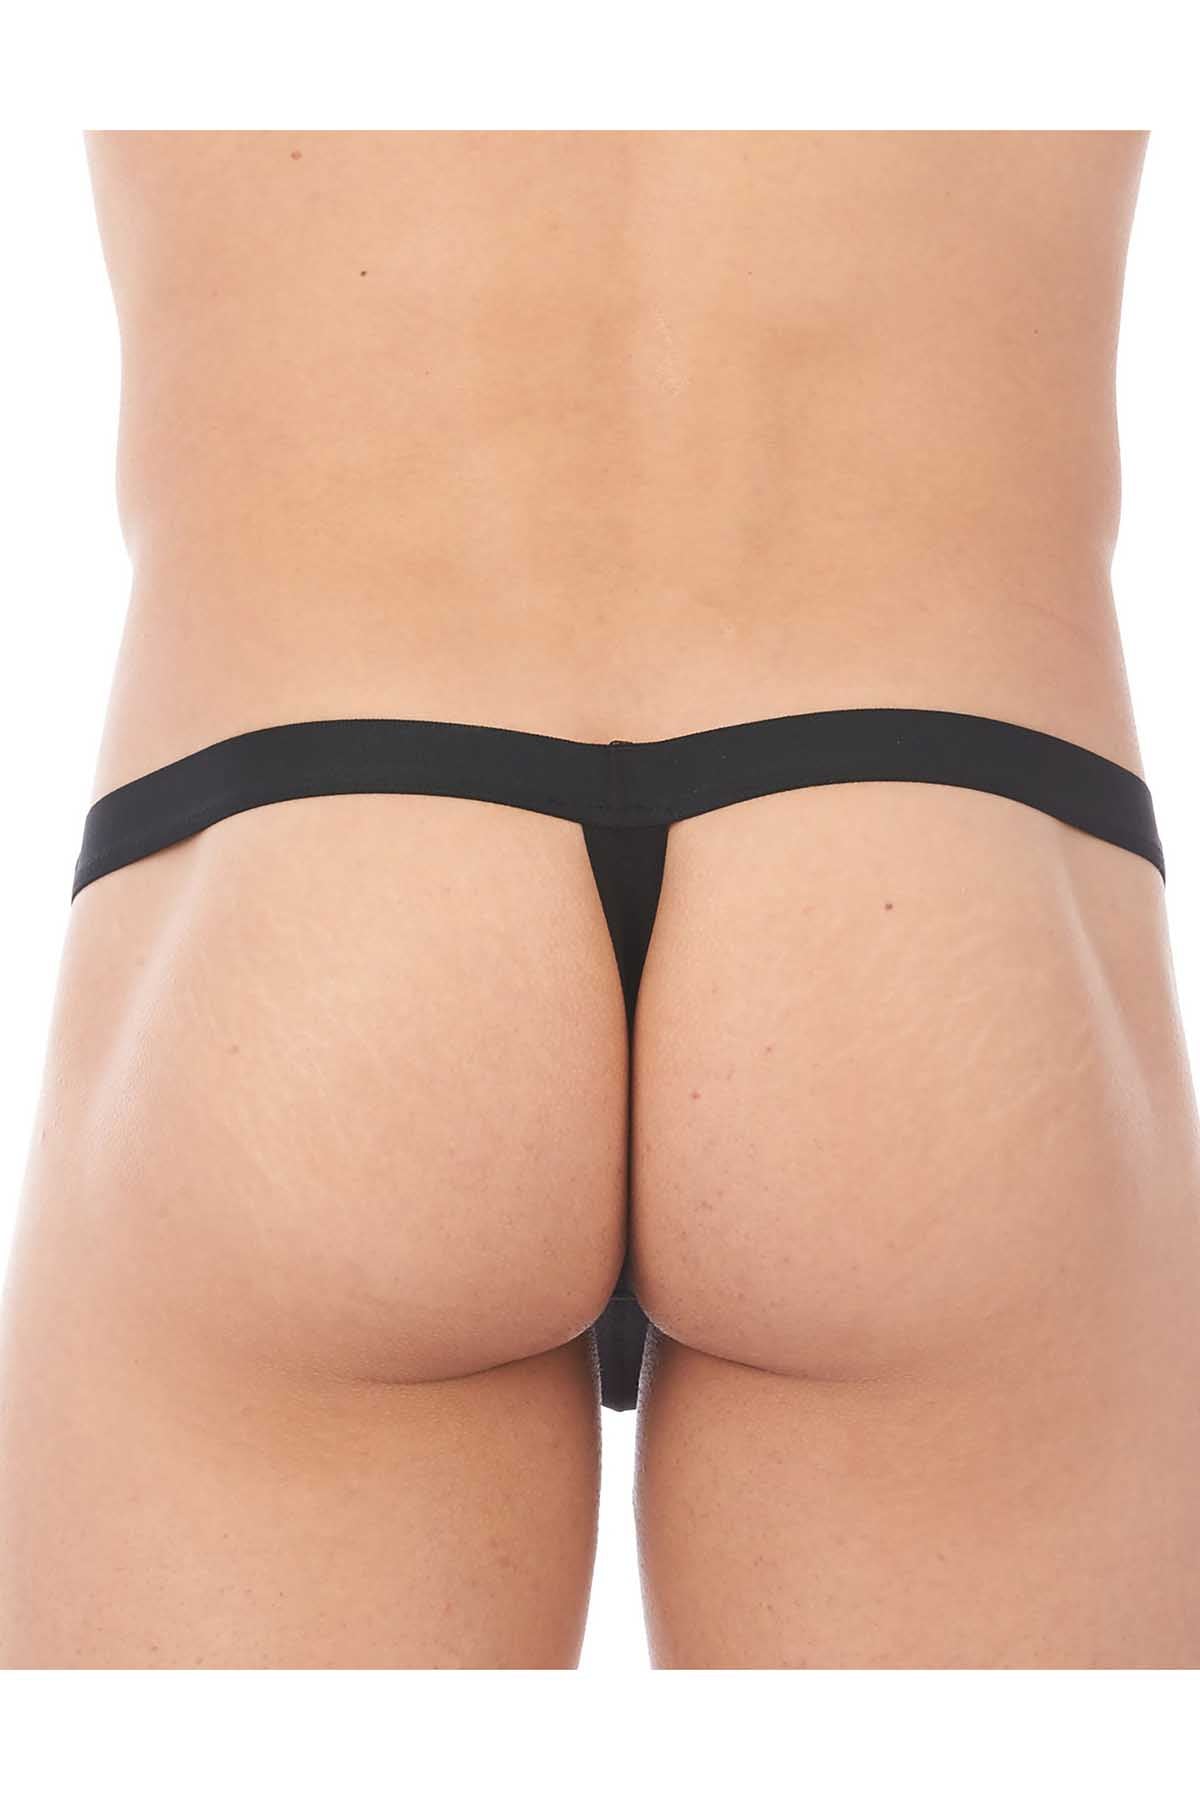 Gregg Homme Black Chaser C-Ring Detachable Pouch Thong